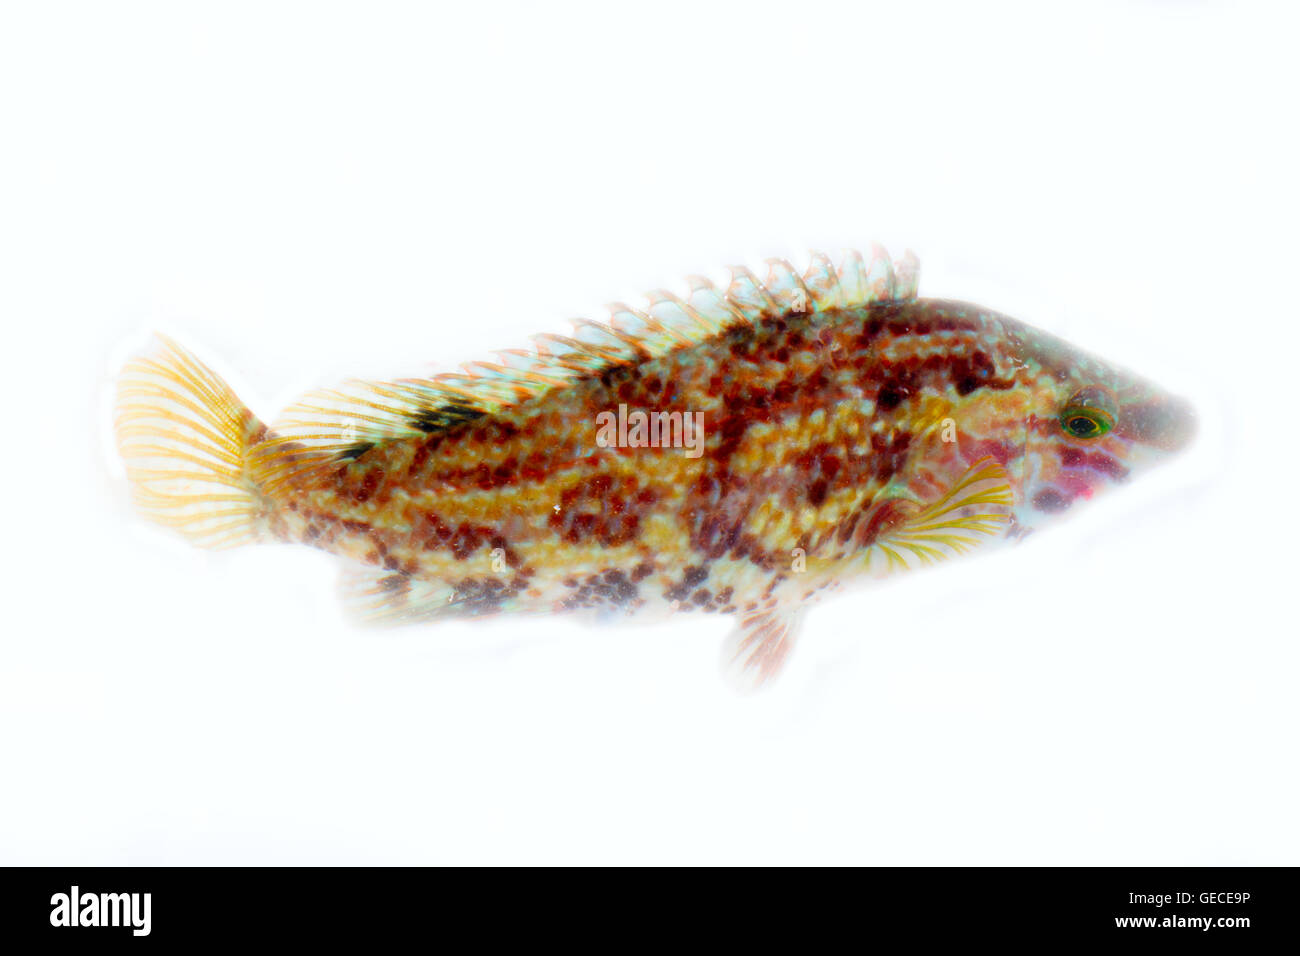 Fish green wrasse (Labrus viridis) waving fins and tail on a white background. Filming closeup Stock Photo